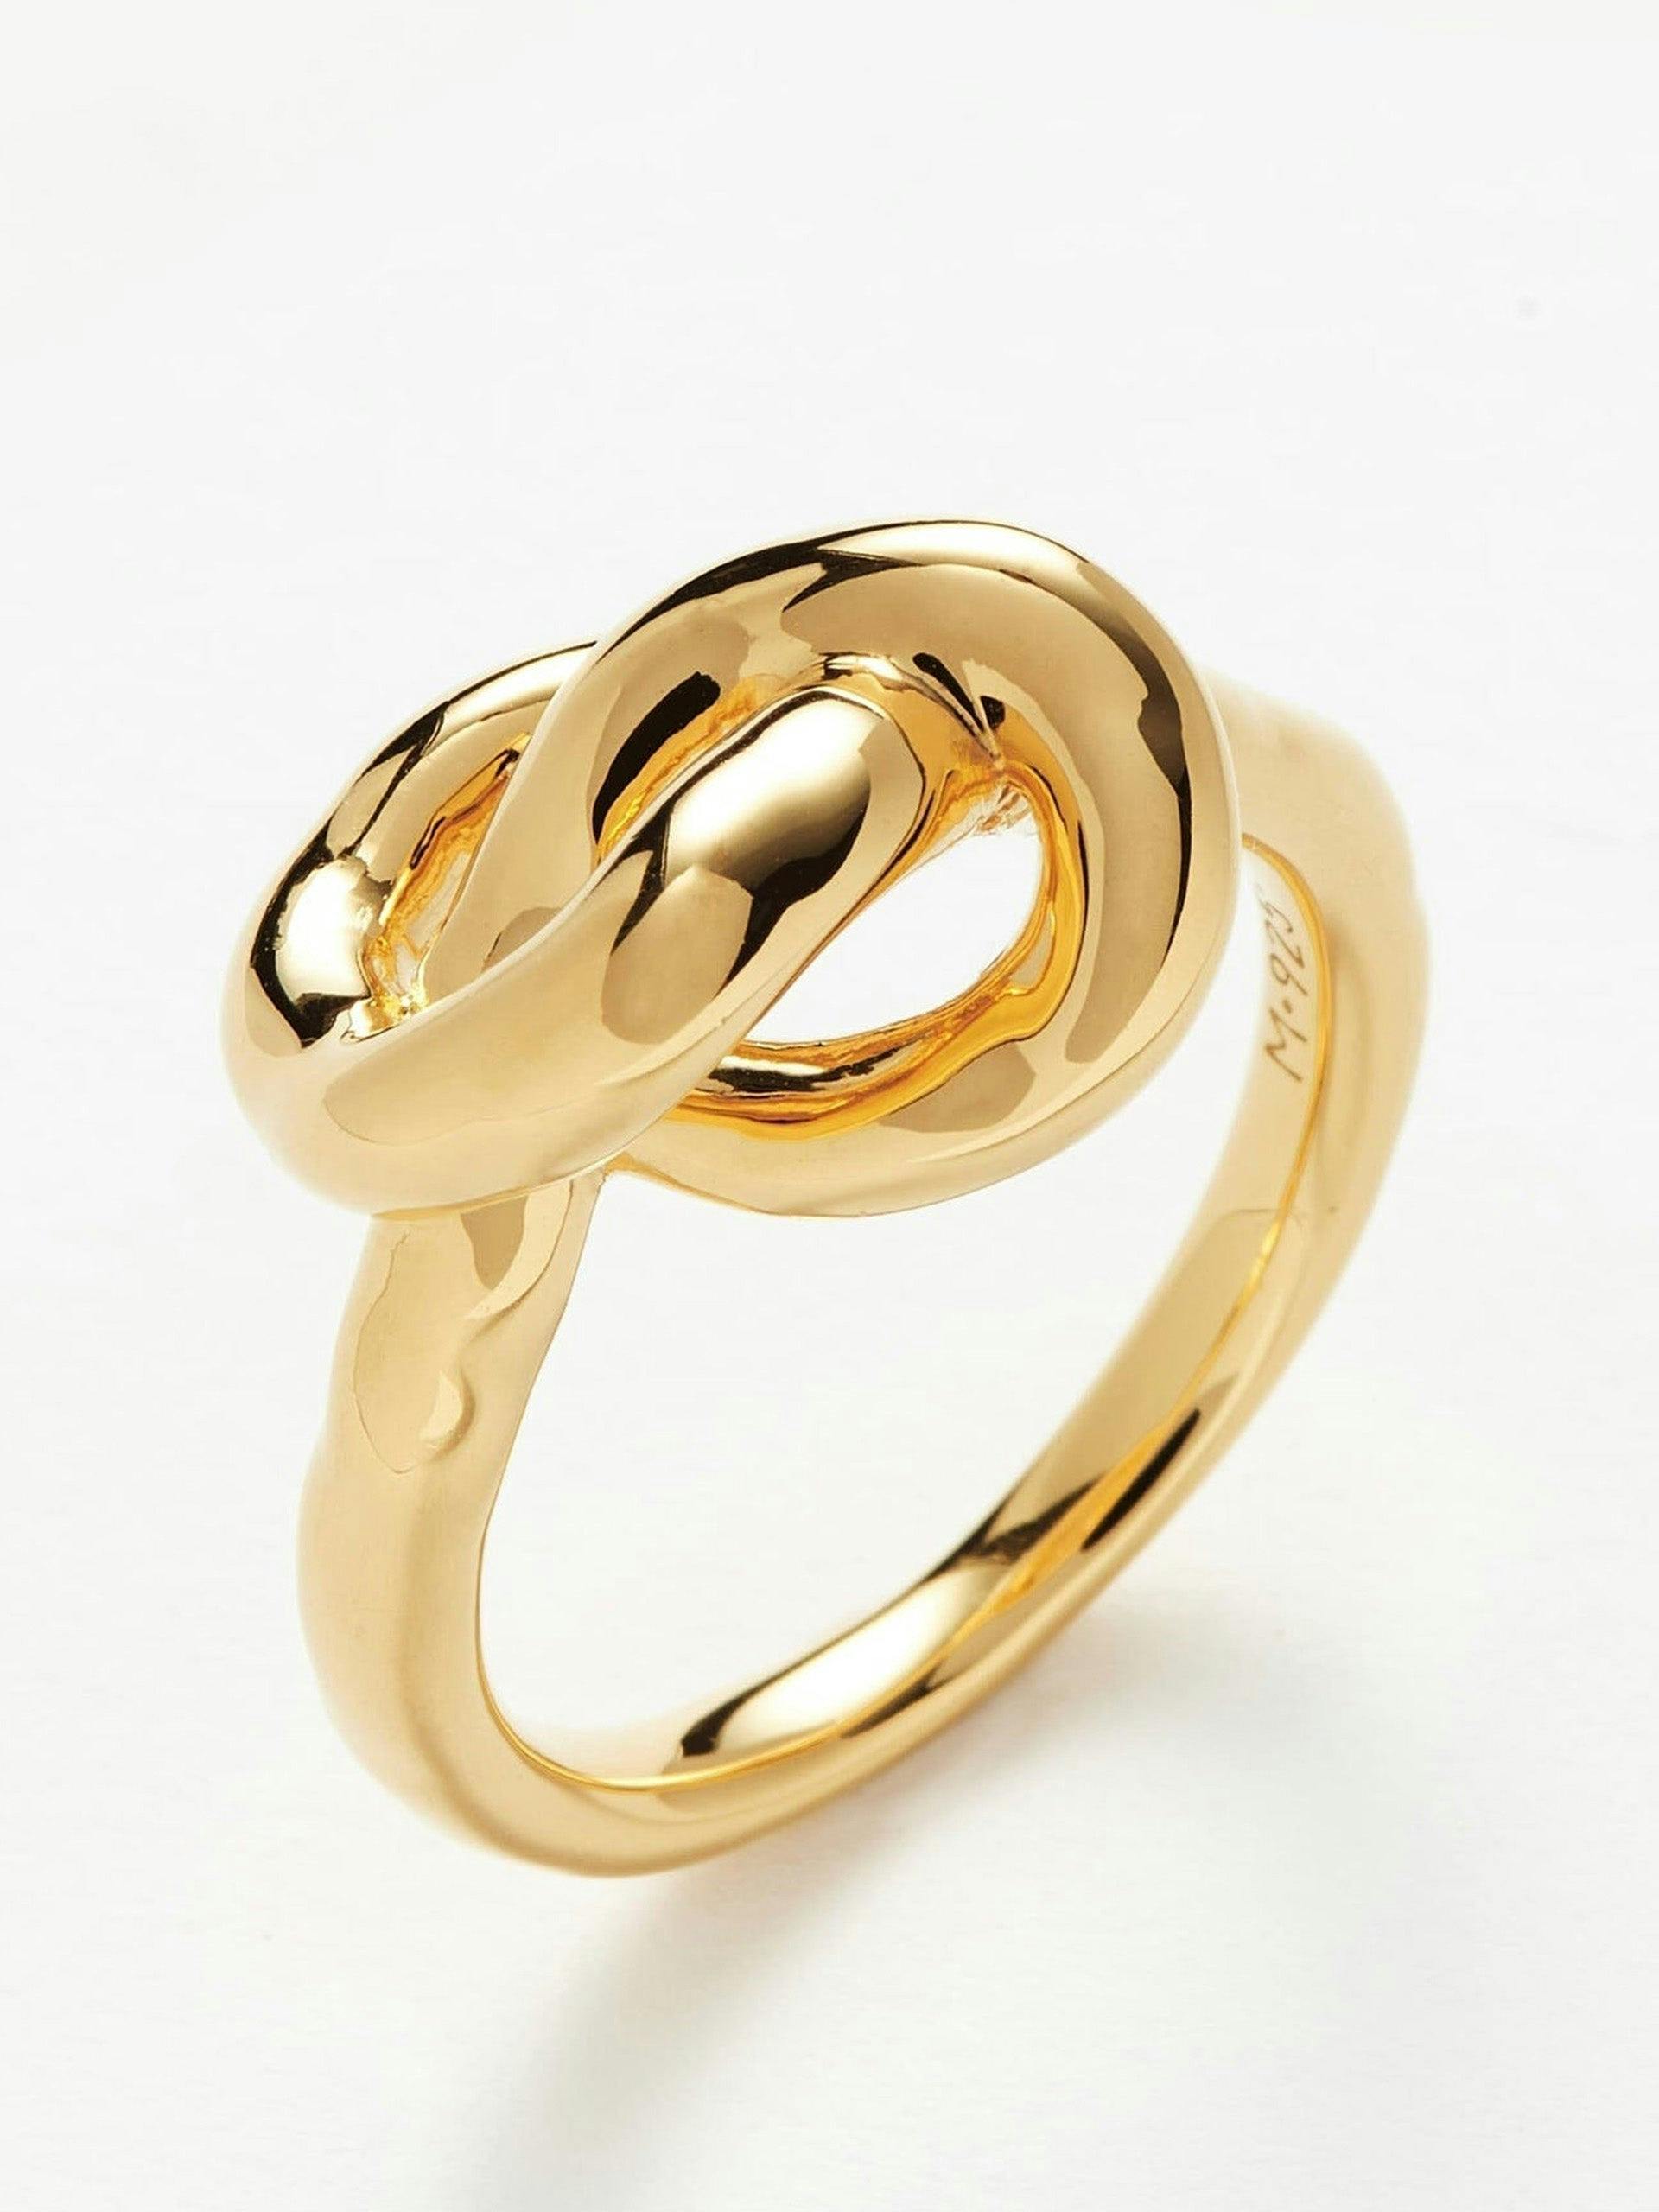 Molten knot stacking ring